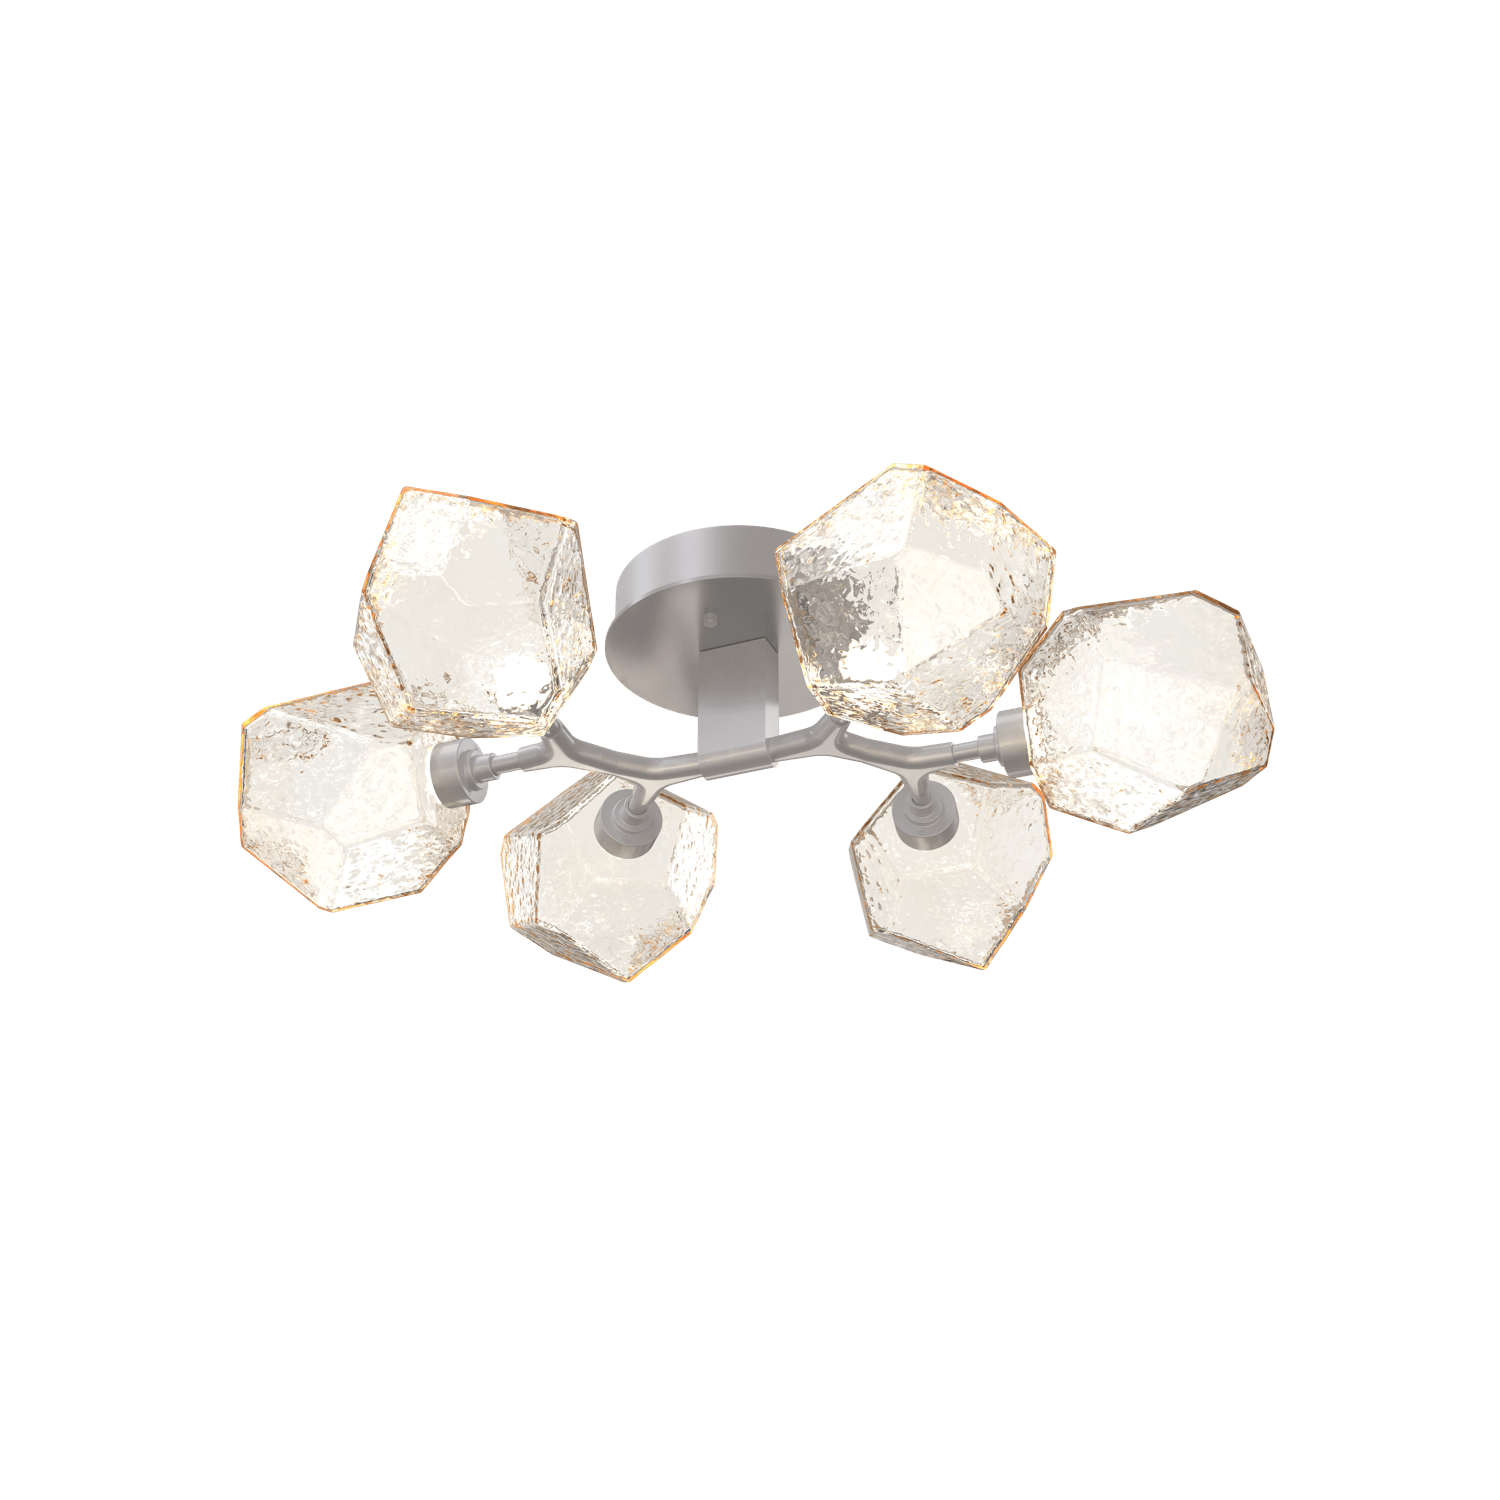 CLB0039-01-CS-A-Hammerton-Studio-Gem-6-light-organic-flush-mount-light-with-classic-silver-finish-and-amber-blown-glass-shades-and-LED-lamping